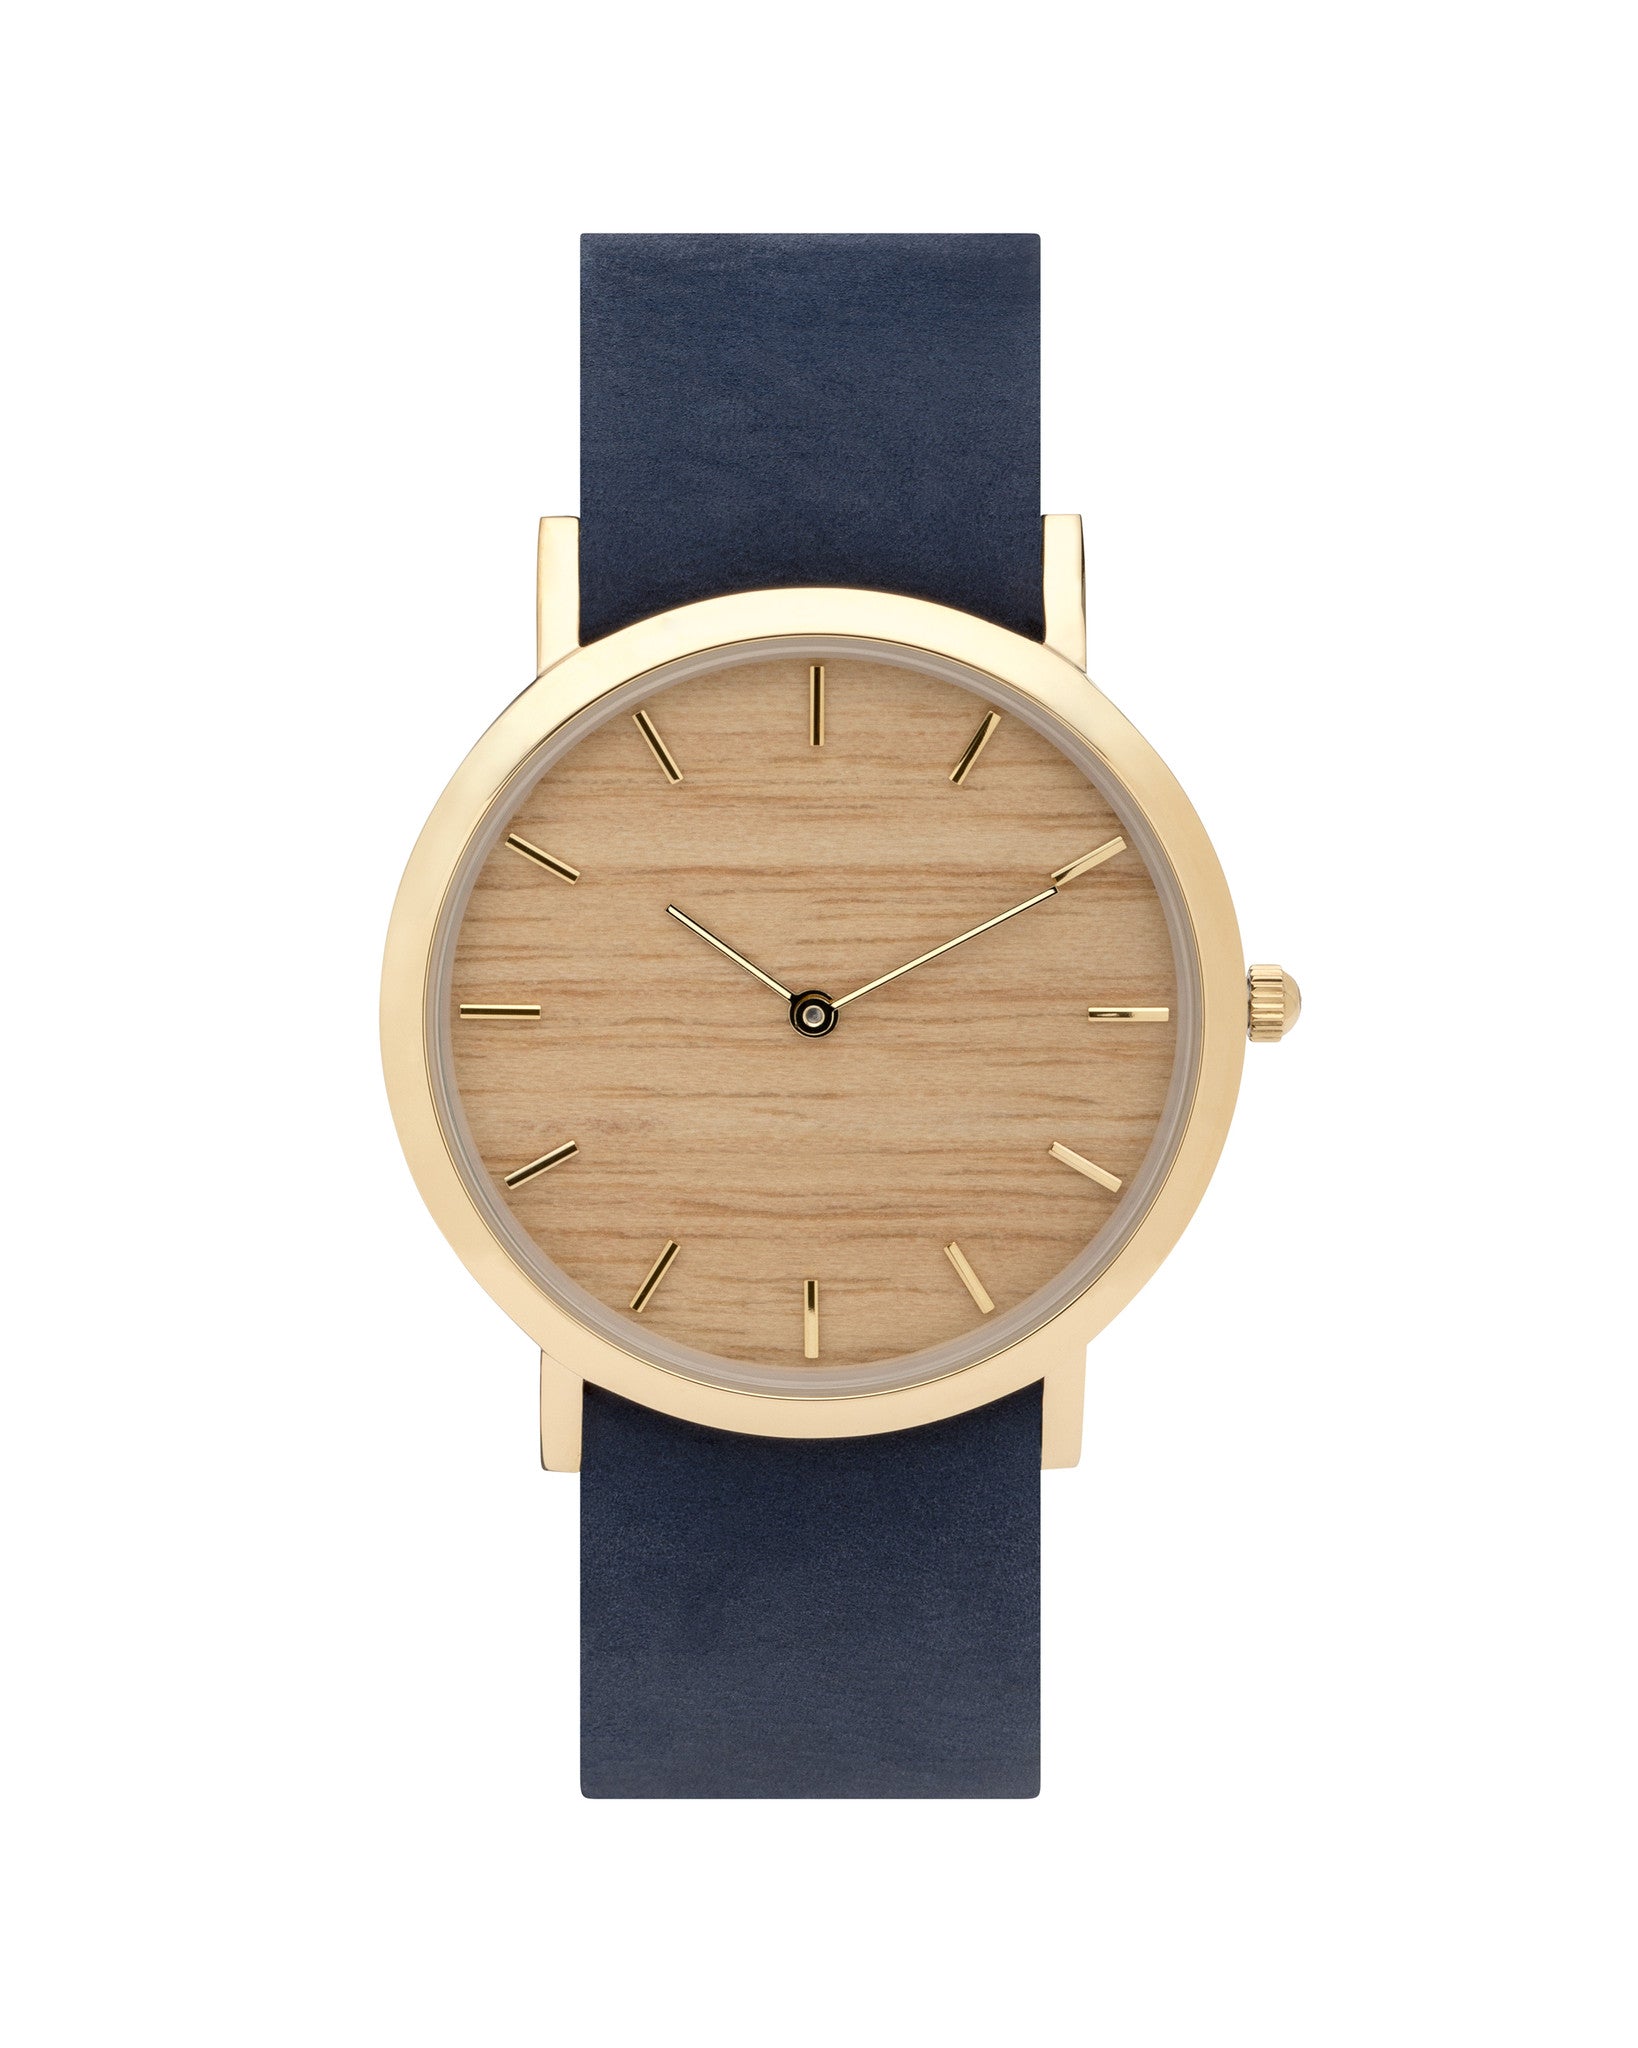 analog watch co. Silverheart Wood Classic Watch Cherry Leather